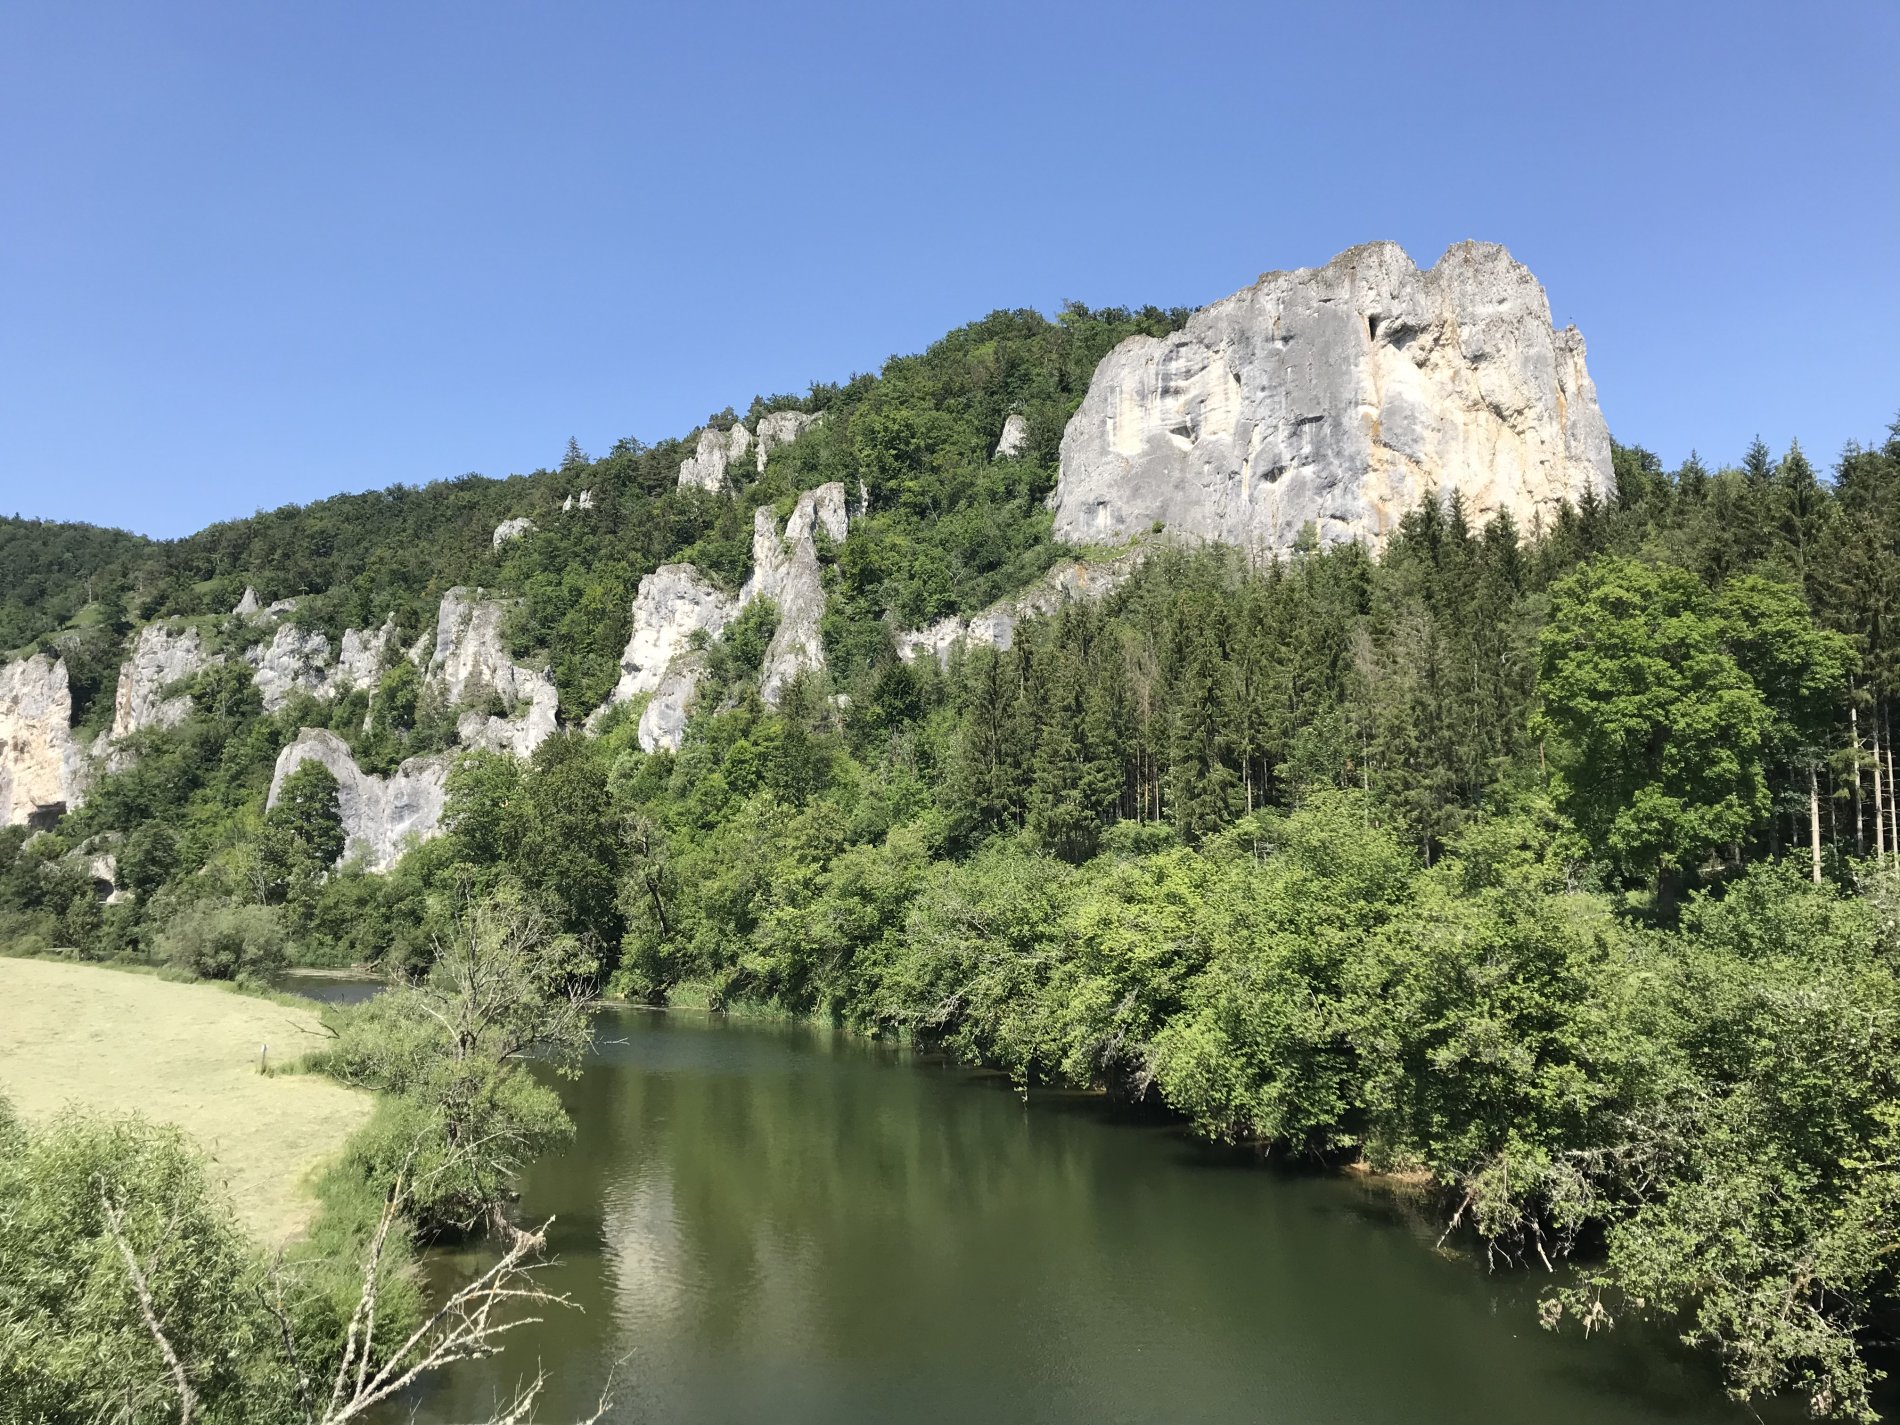 The Rabenfelsen in Thiergarten, in the foreground the Danube.